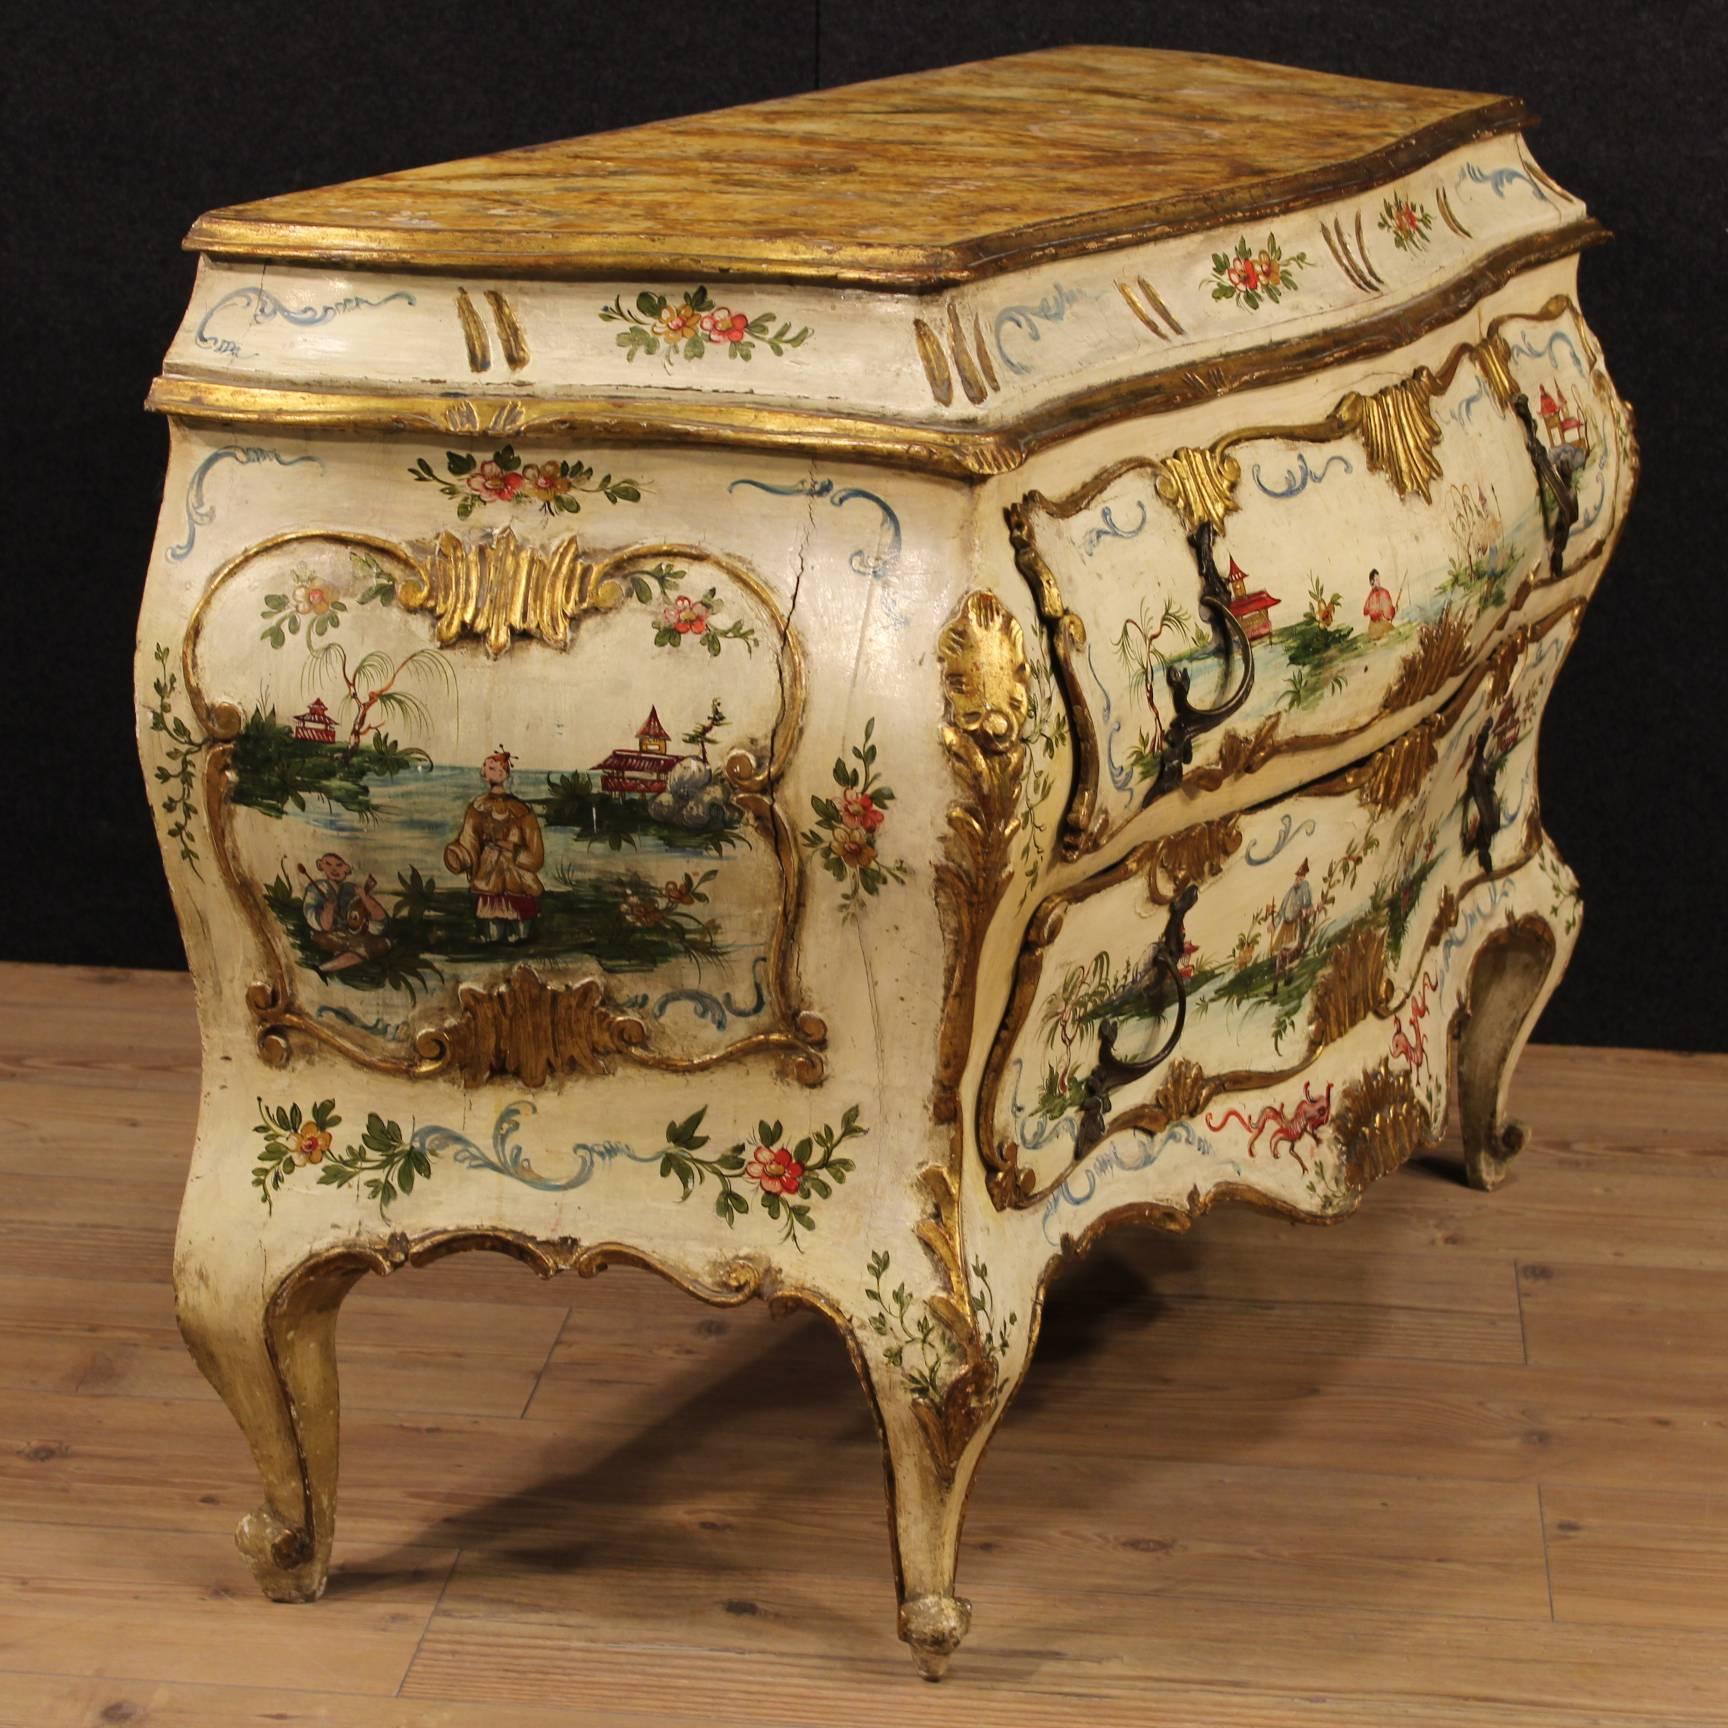 Venetian chinoiserie gilt and lacquered dresser. Chest of drawers made by carved wood and hand-painted with floral motifs and oriental style characters and landscapes. Furniture moved and curved of the 20th century of excellent quality and great